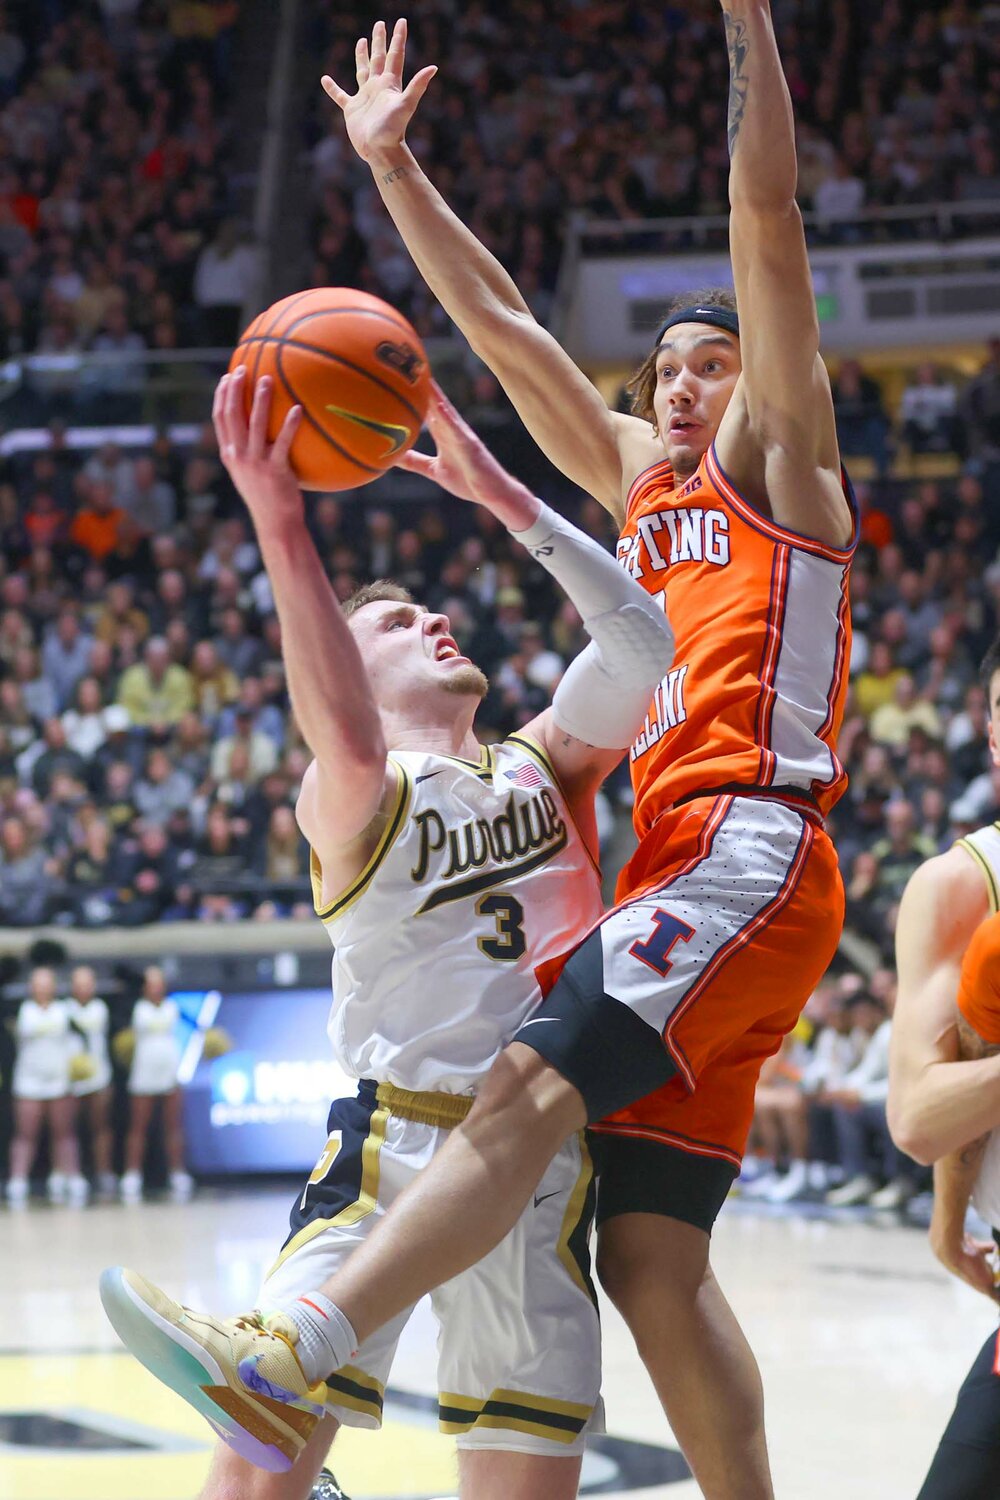 Dra Gibbs-Lawhorn of Illinois - crashing into Braden Smith of Purdue while trying to block a lay-up